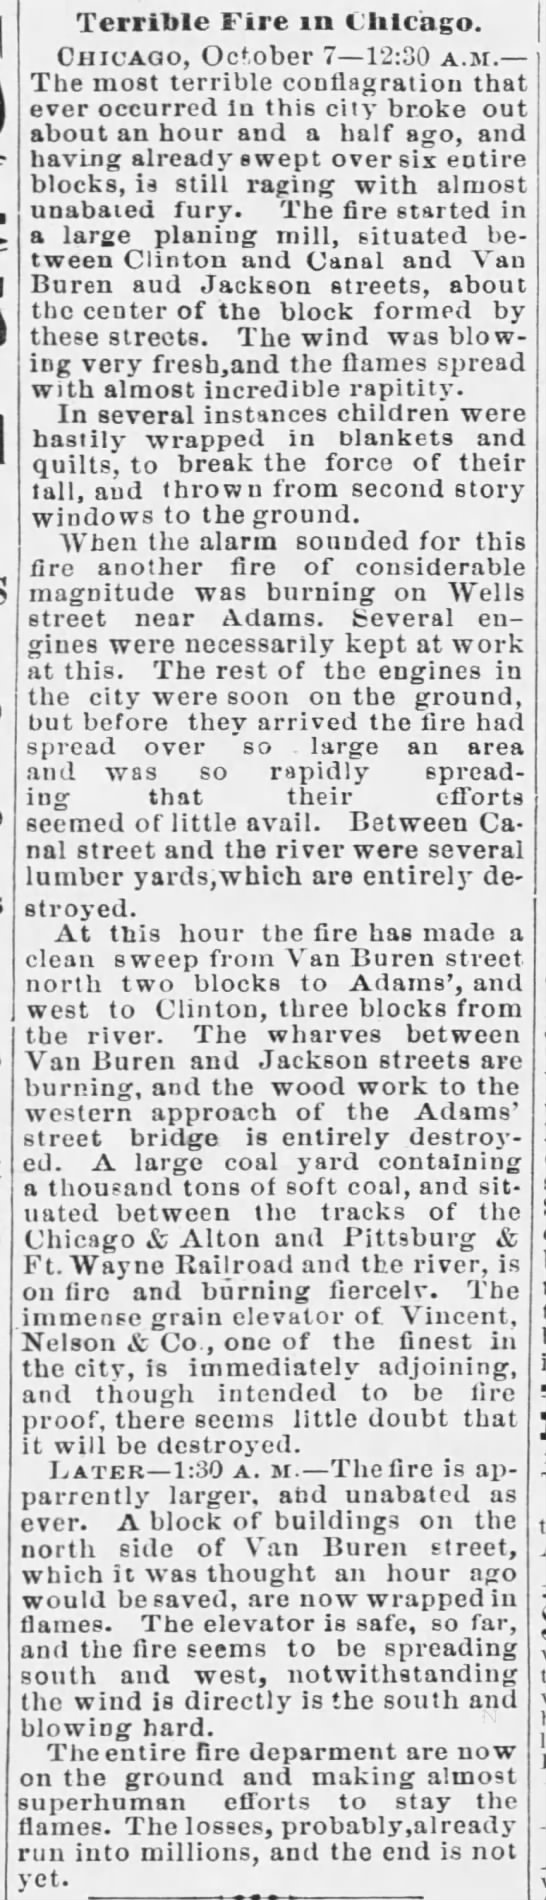 Terrible Fire in Chicago 1871 - 